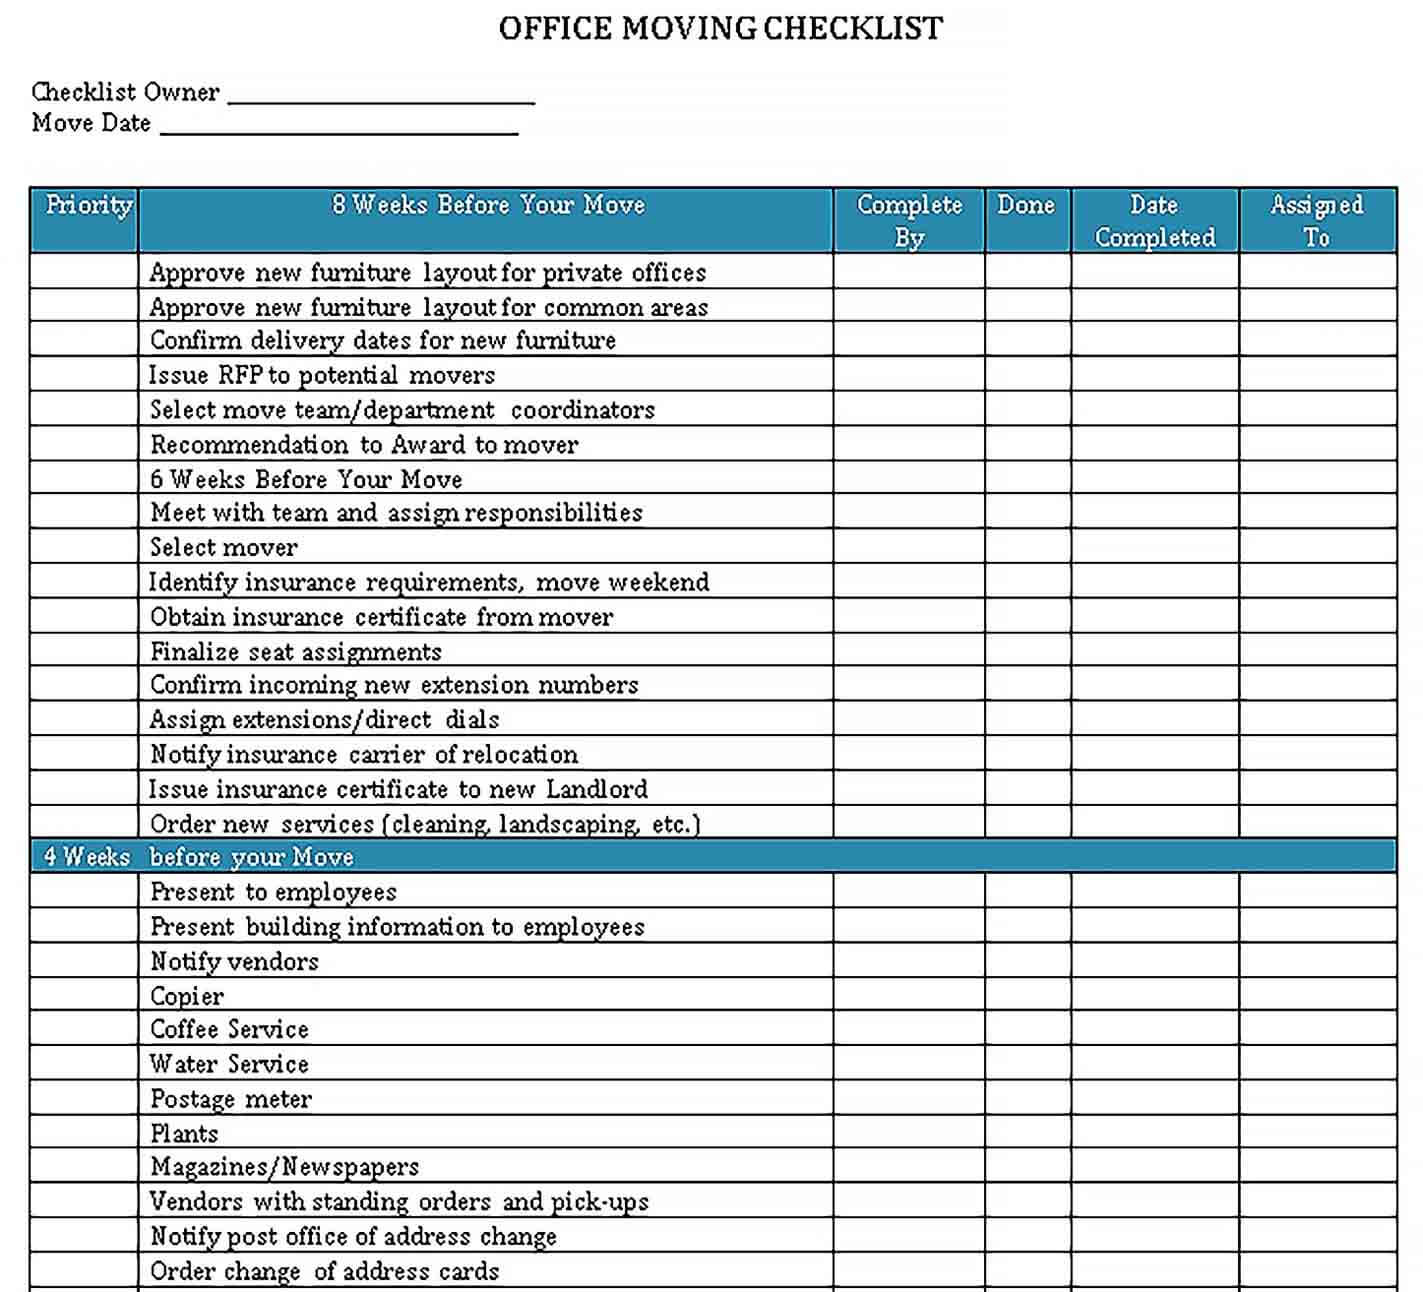 Best Moving Checklist Templates  Inside Office Move Checklist Template In Office Move Checklist Template